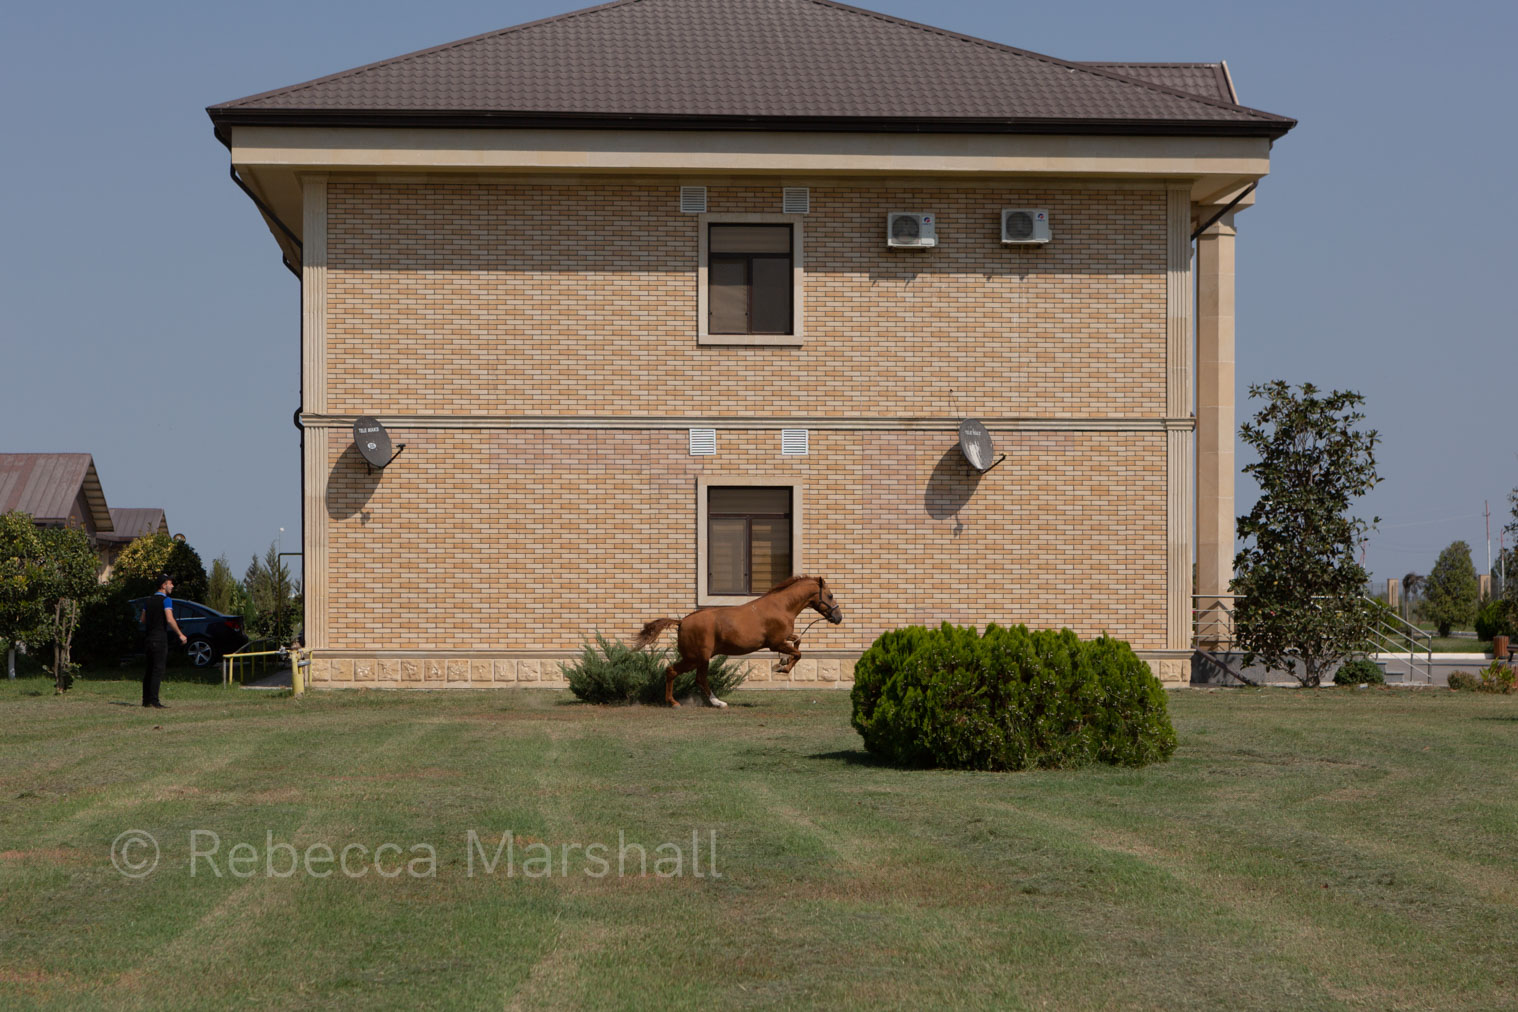 A photograph of a galloping horse in the distance, in front of a brick building